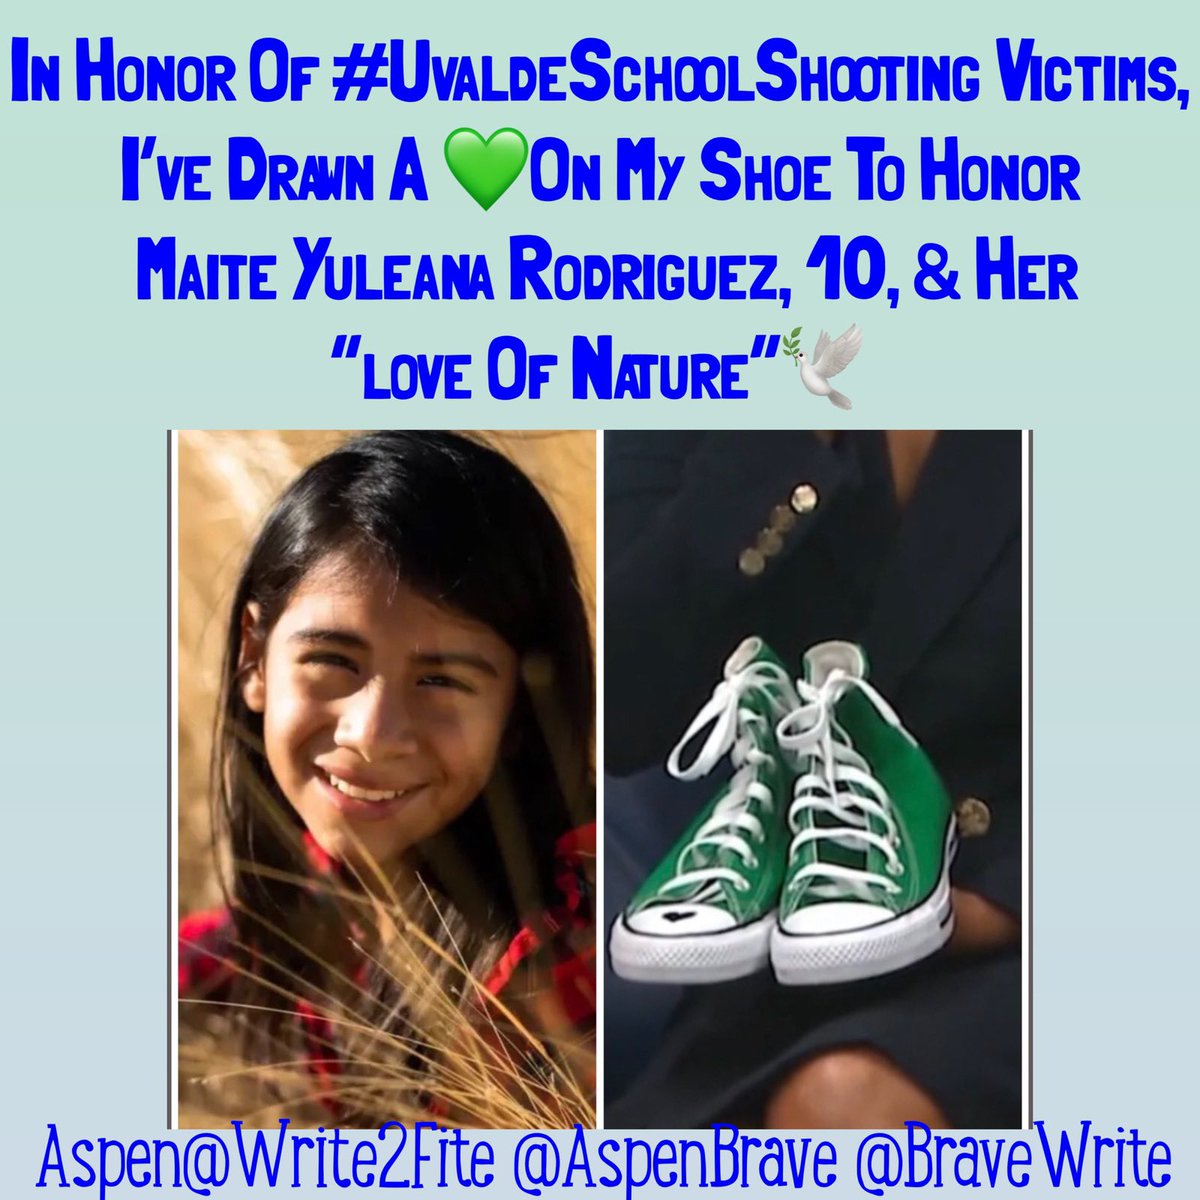 👆PLEASE READ ABOVE🙏

#BraveWrite #vss365 All…

‼️This #Native American Honors #MaiteYuleanaRodriguez by drawing a 💚 on my shoe, too, for “her love of nature”…
🪶
& All #UvaldeSchoolMassacre Victims Today🕯
🕊
(Please Watch)
👇
Matthew McConaughey on 
youtu.be/0gcQkeBvhoQ